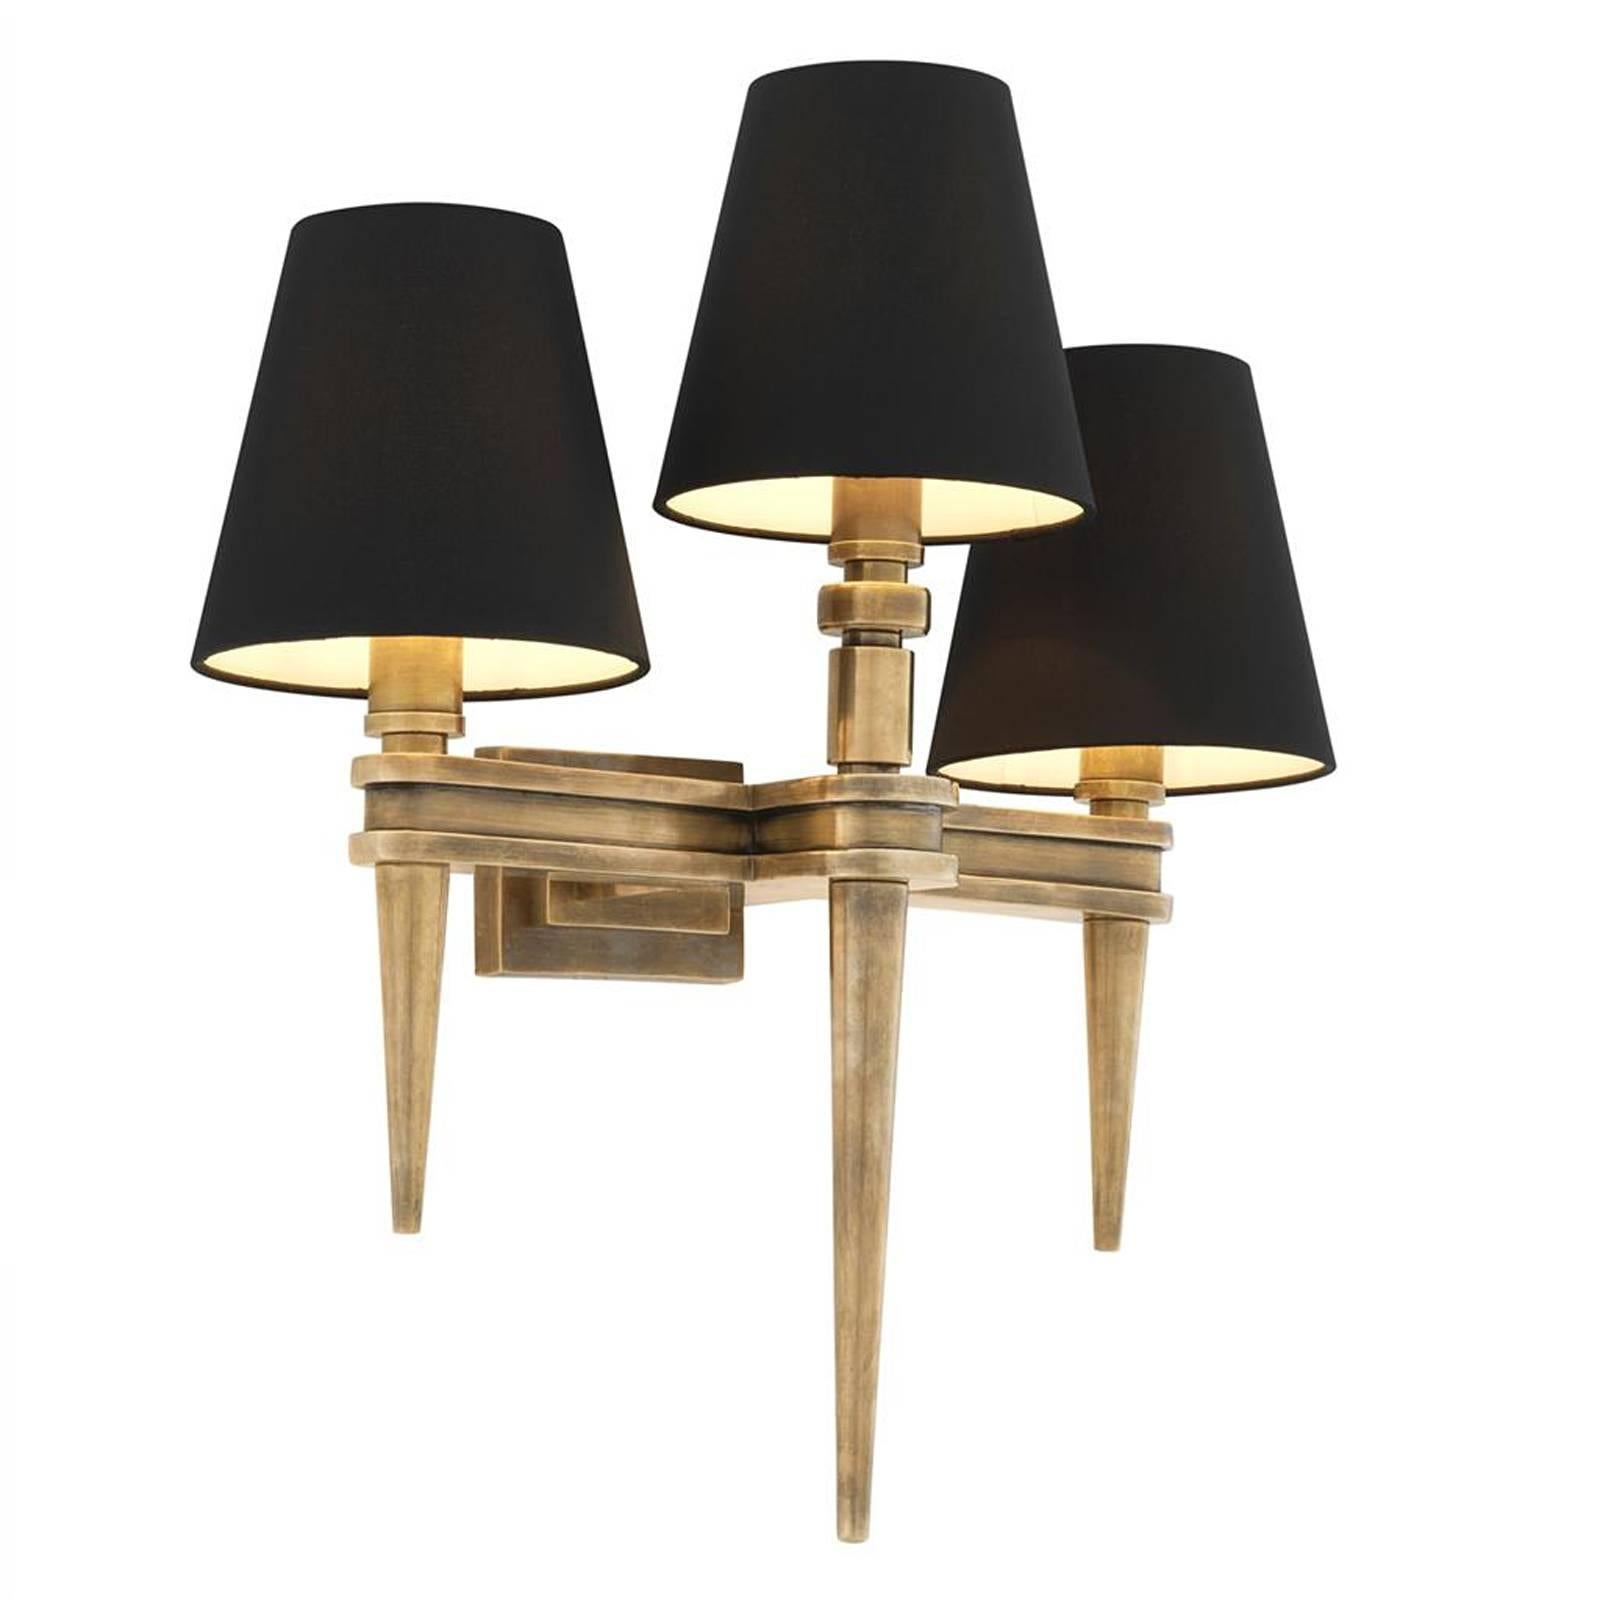 Austerlitz Triple Wall Lamp in Vintage Brass or in Nickel Finish For Sale